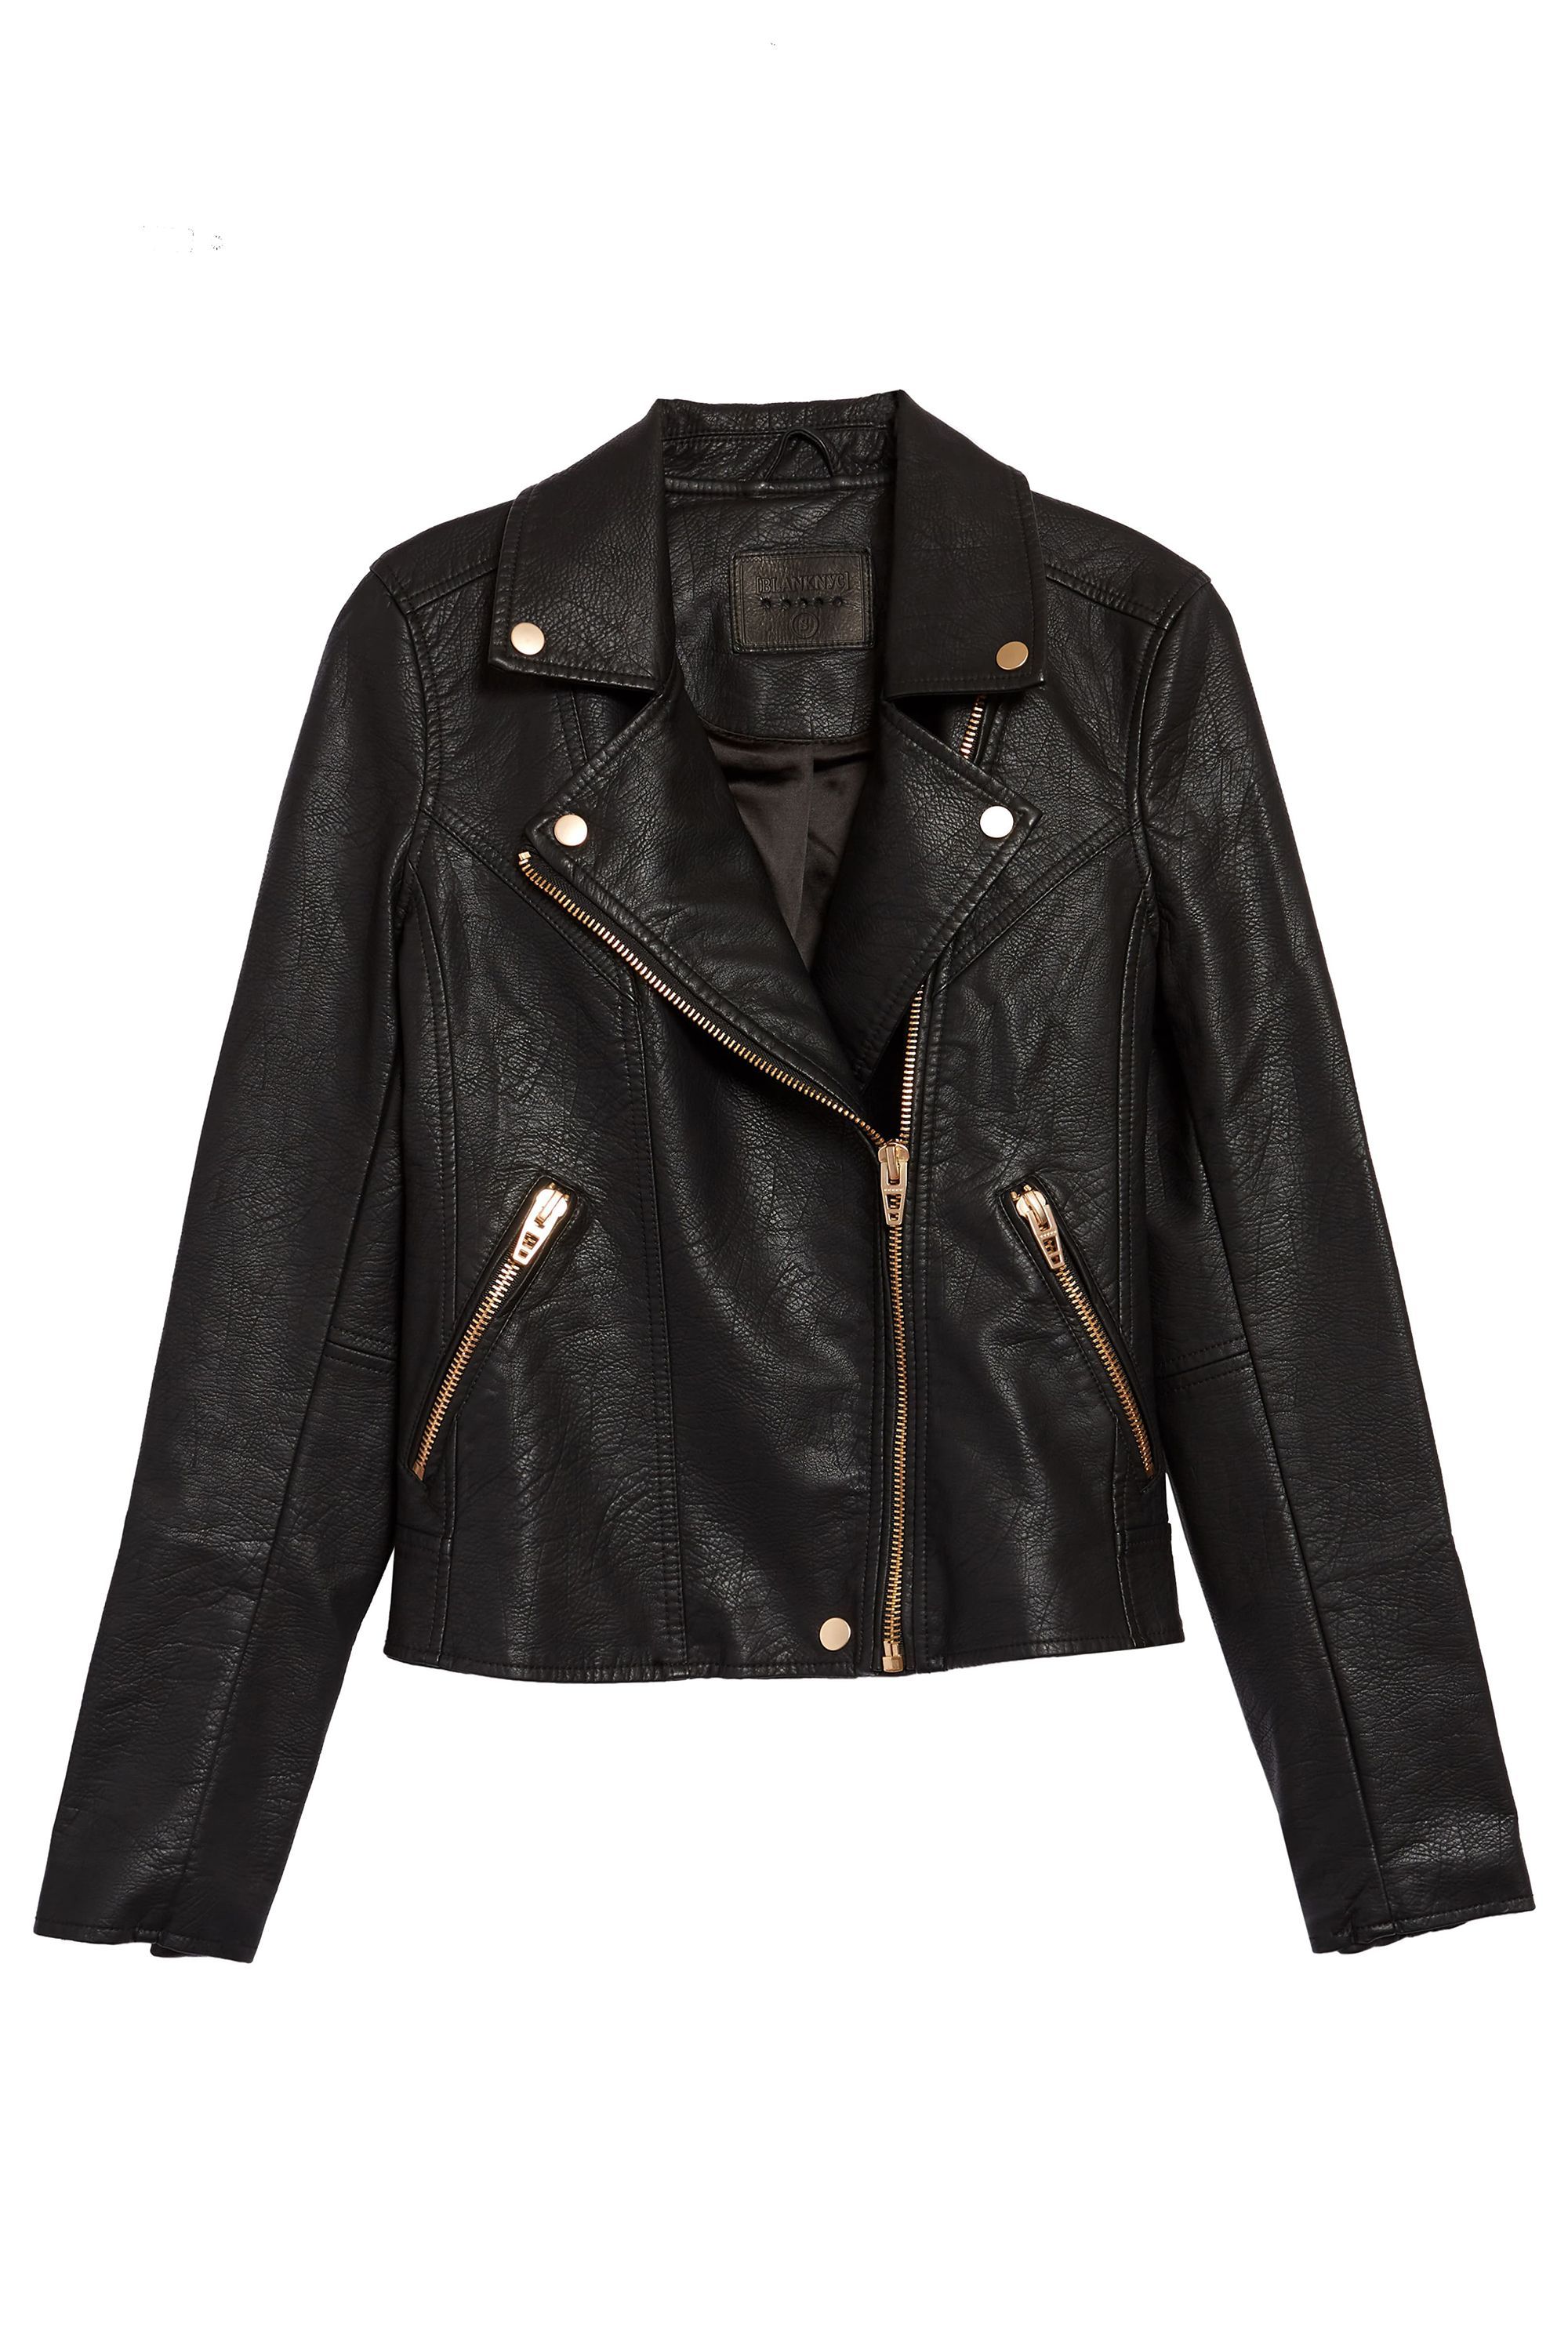 20 Quality Leather Jackets for Women 